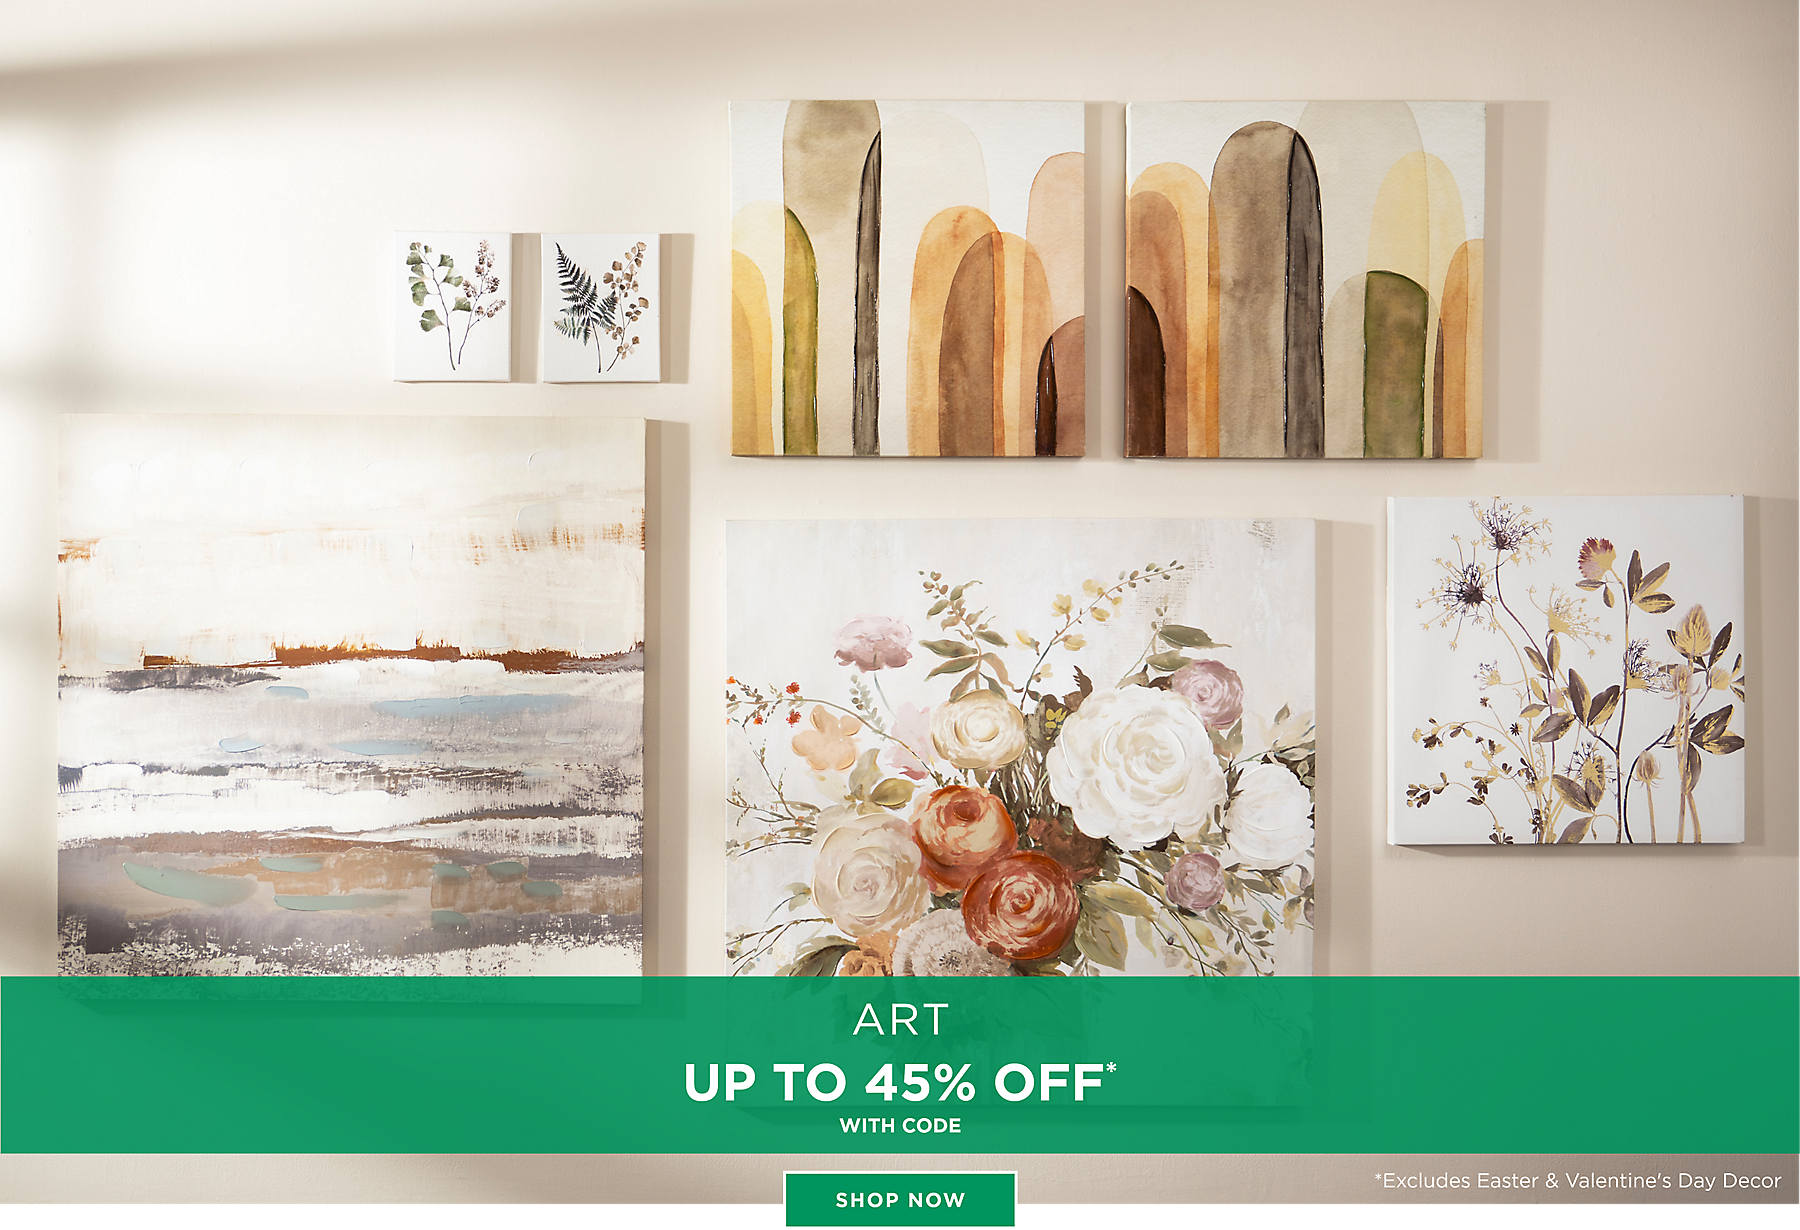 Art Up to 45% Off* with code Shop Now *Excludes Easter & Valentine's Day Decor